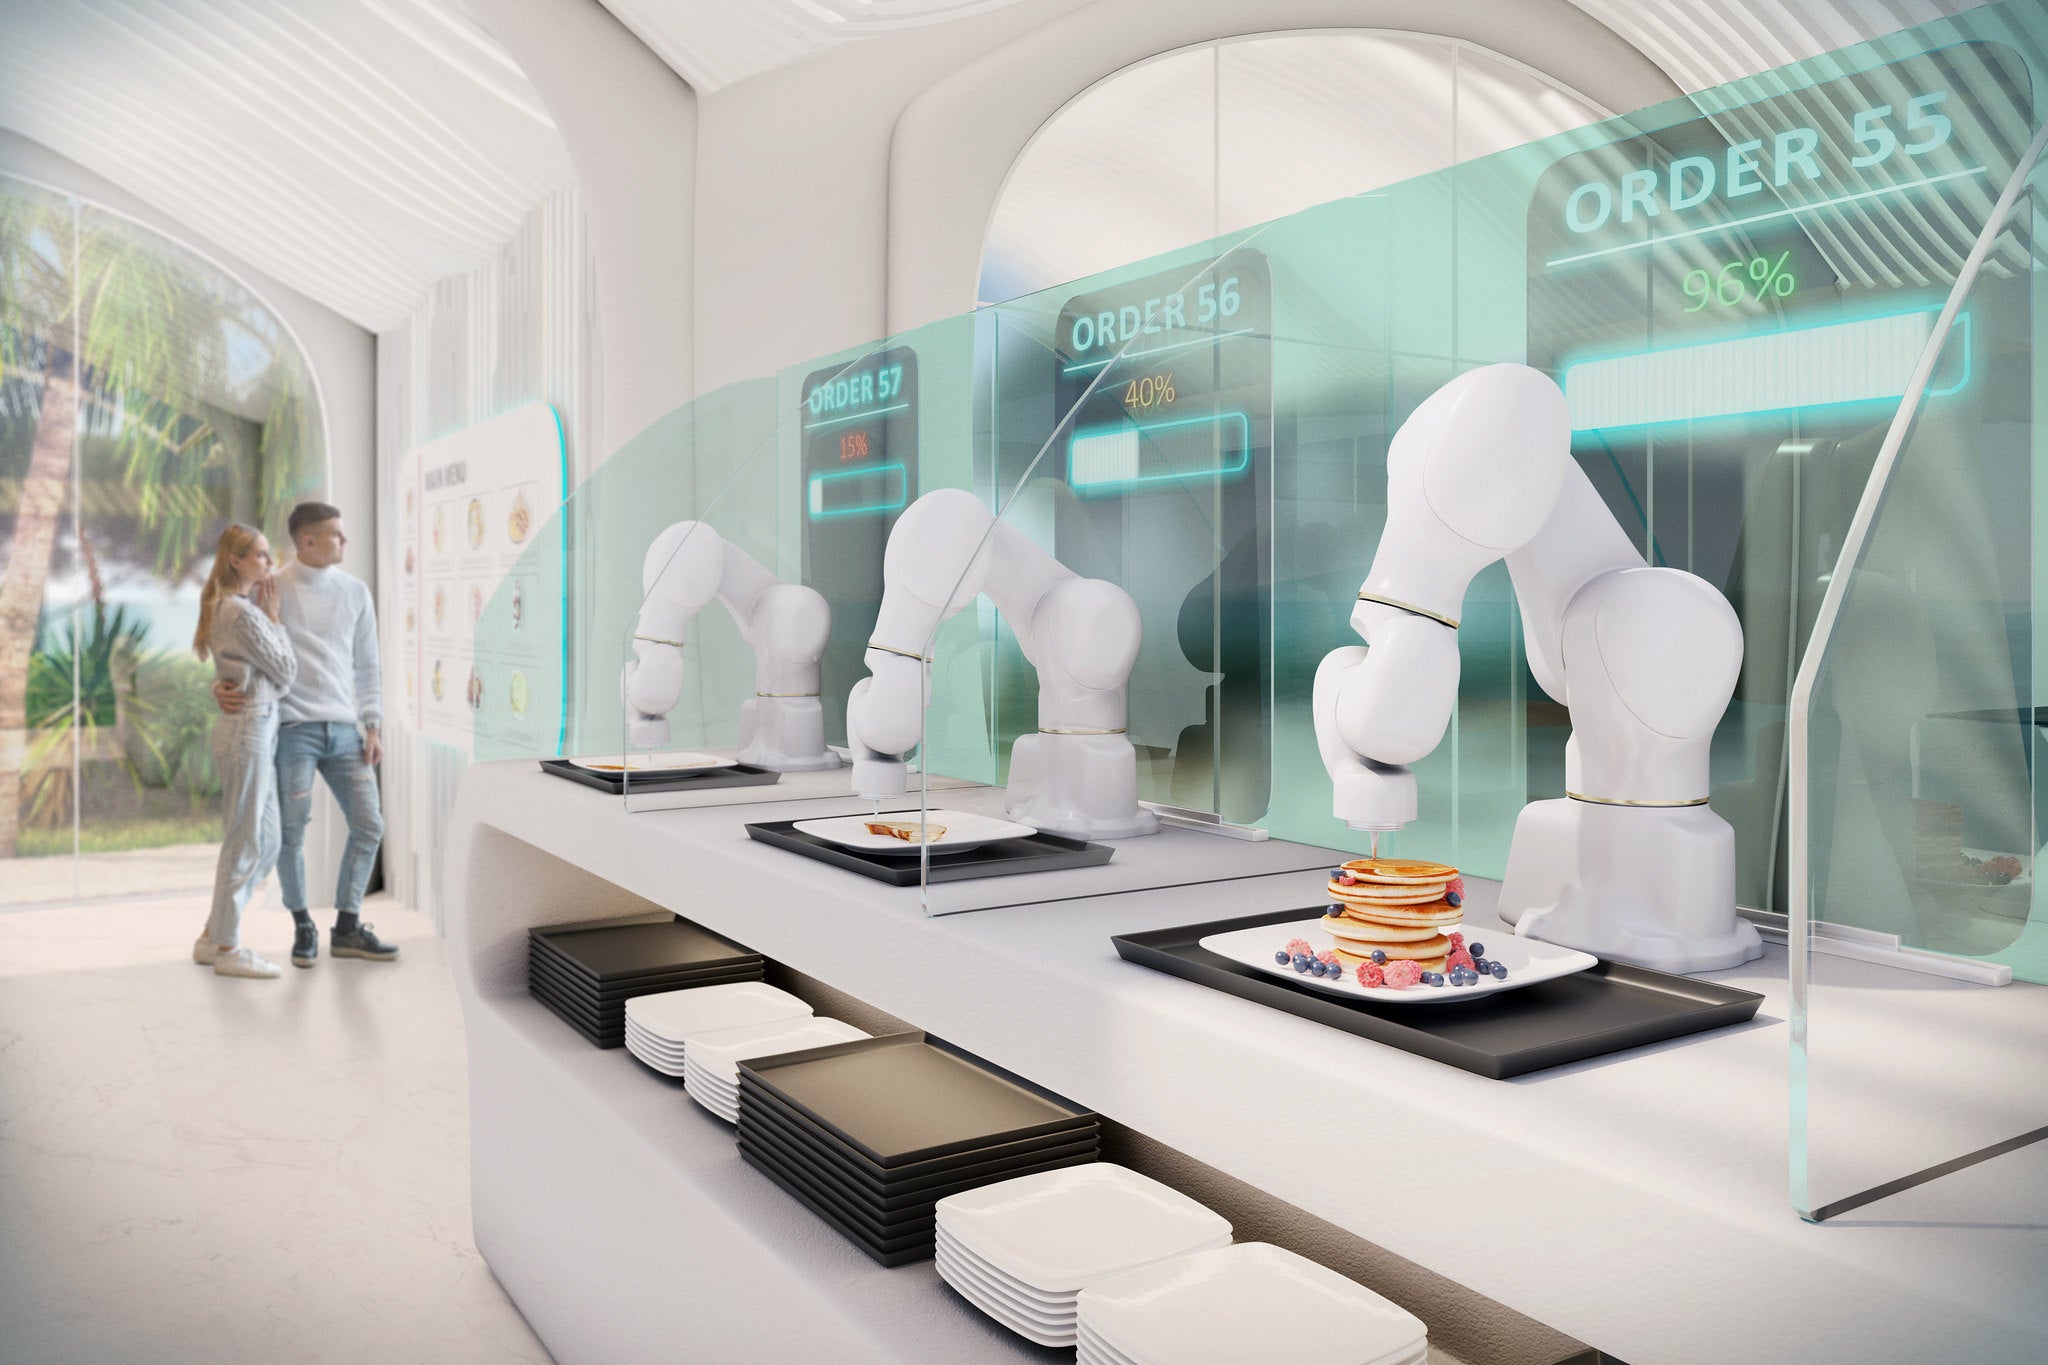 Hotel guests will be able to 3D print food in a bid to reduce waste